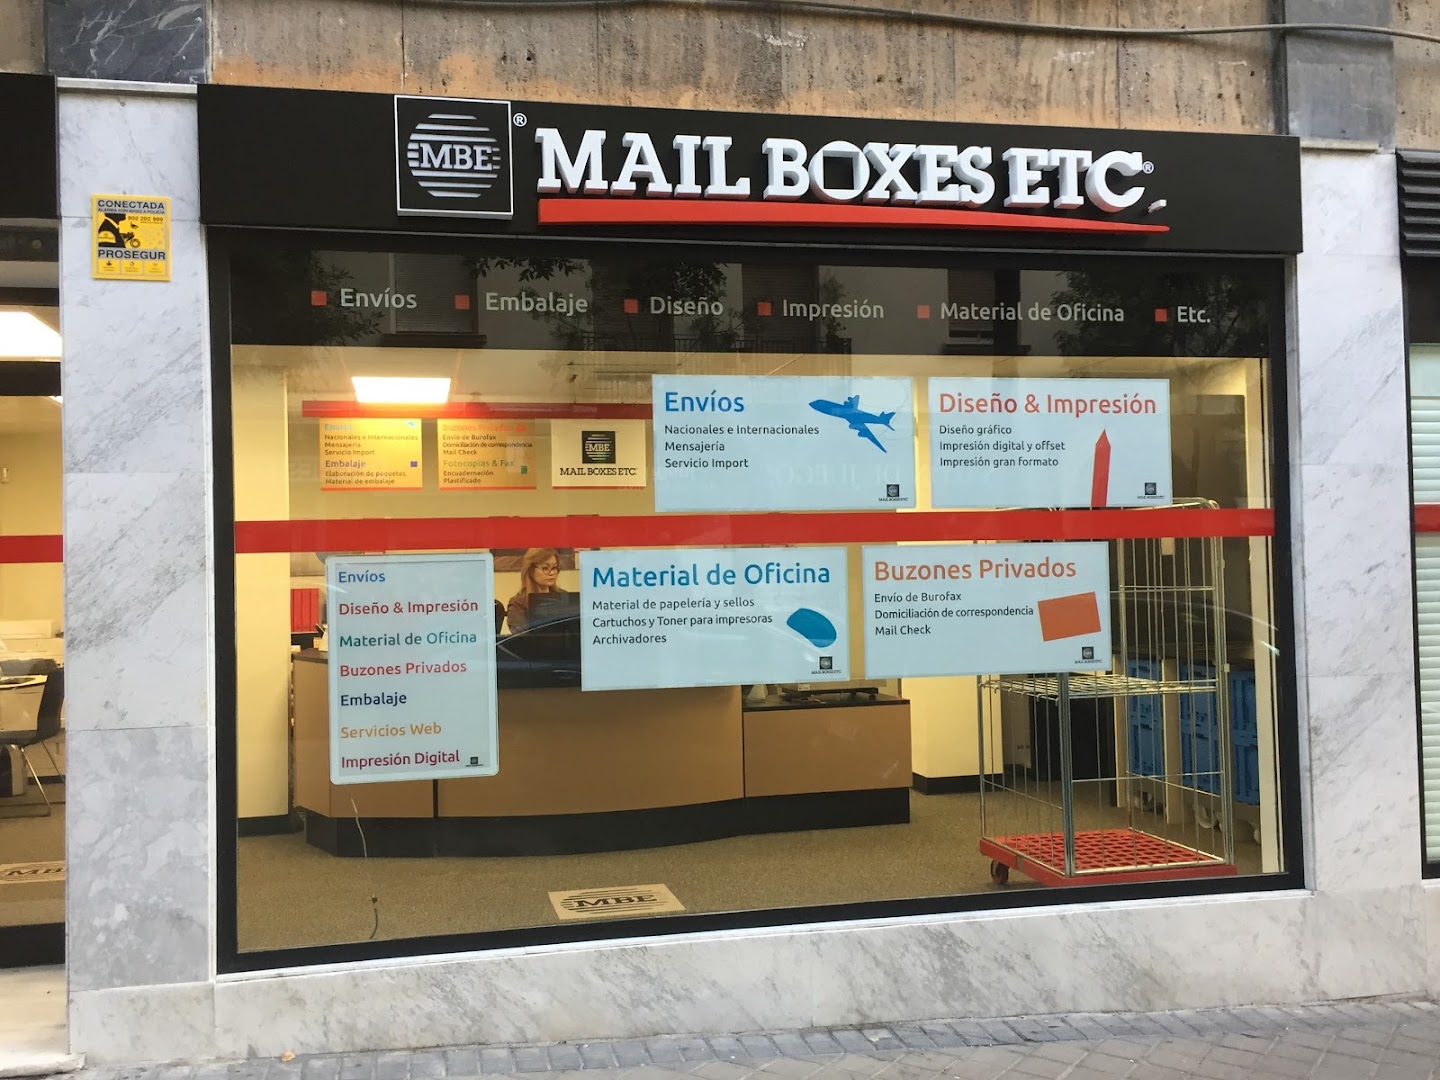 Mail Boxes Etc. - Centro MBE 2940